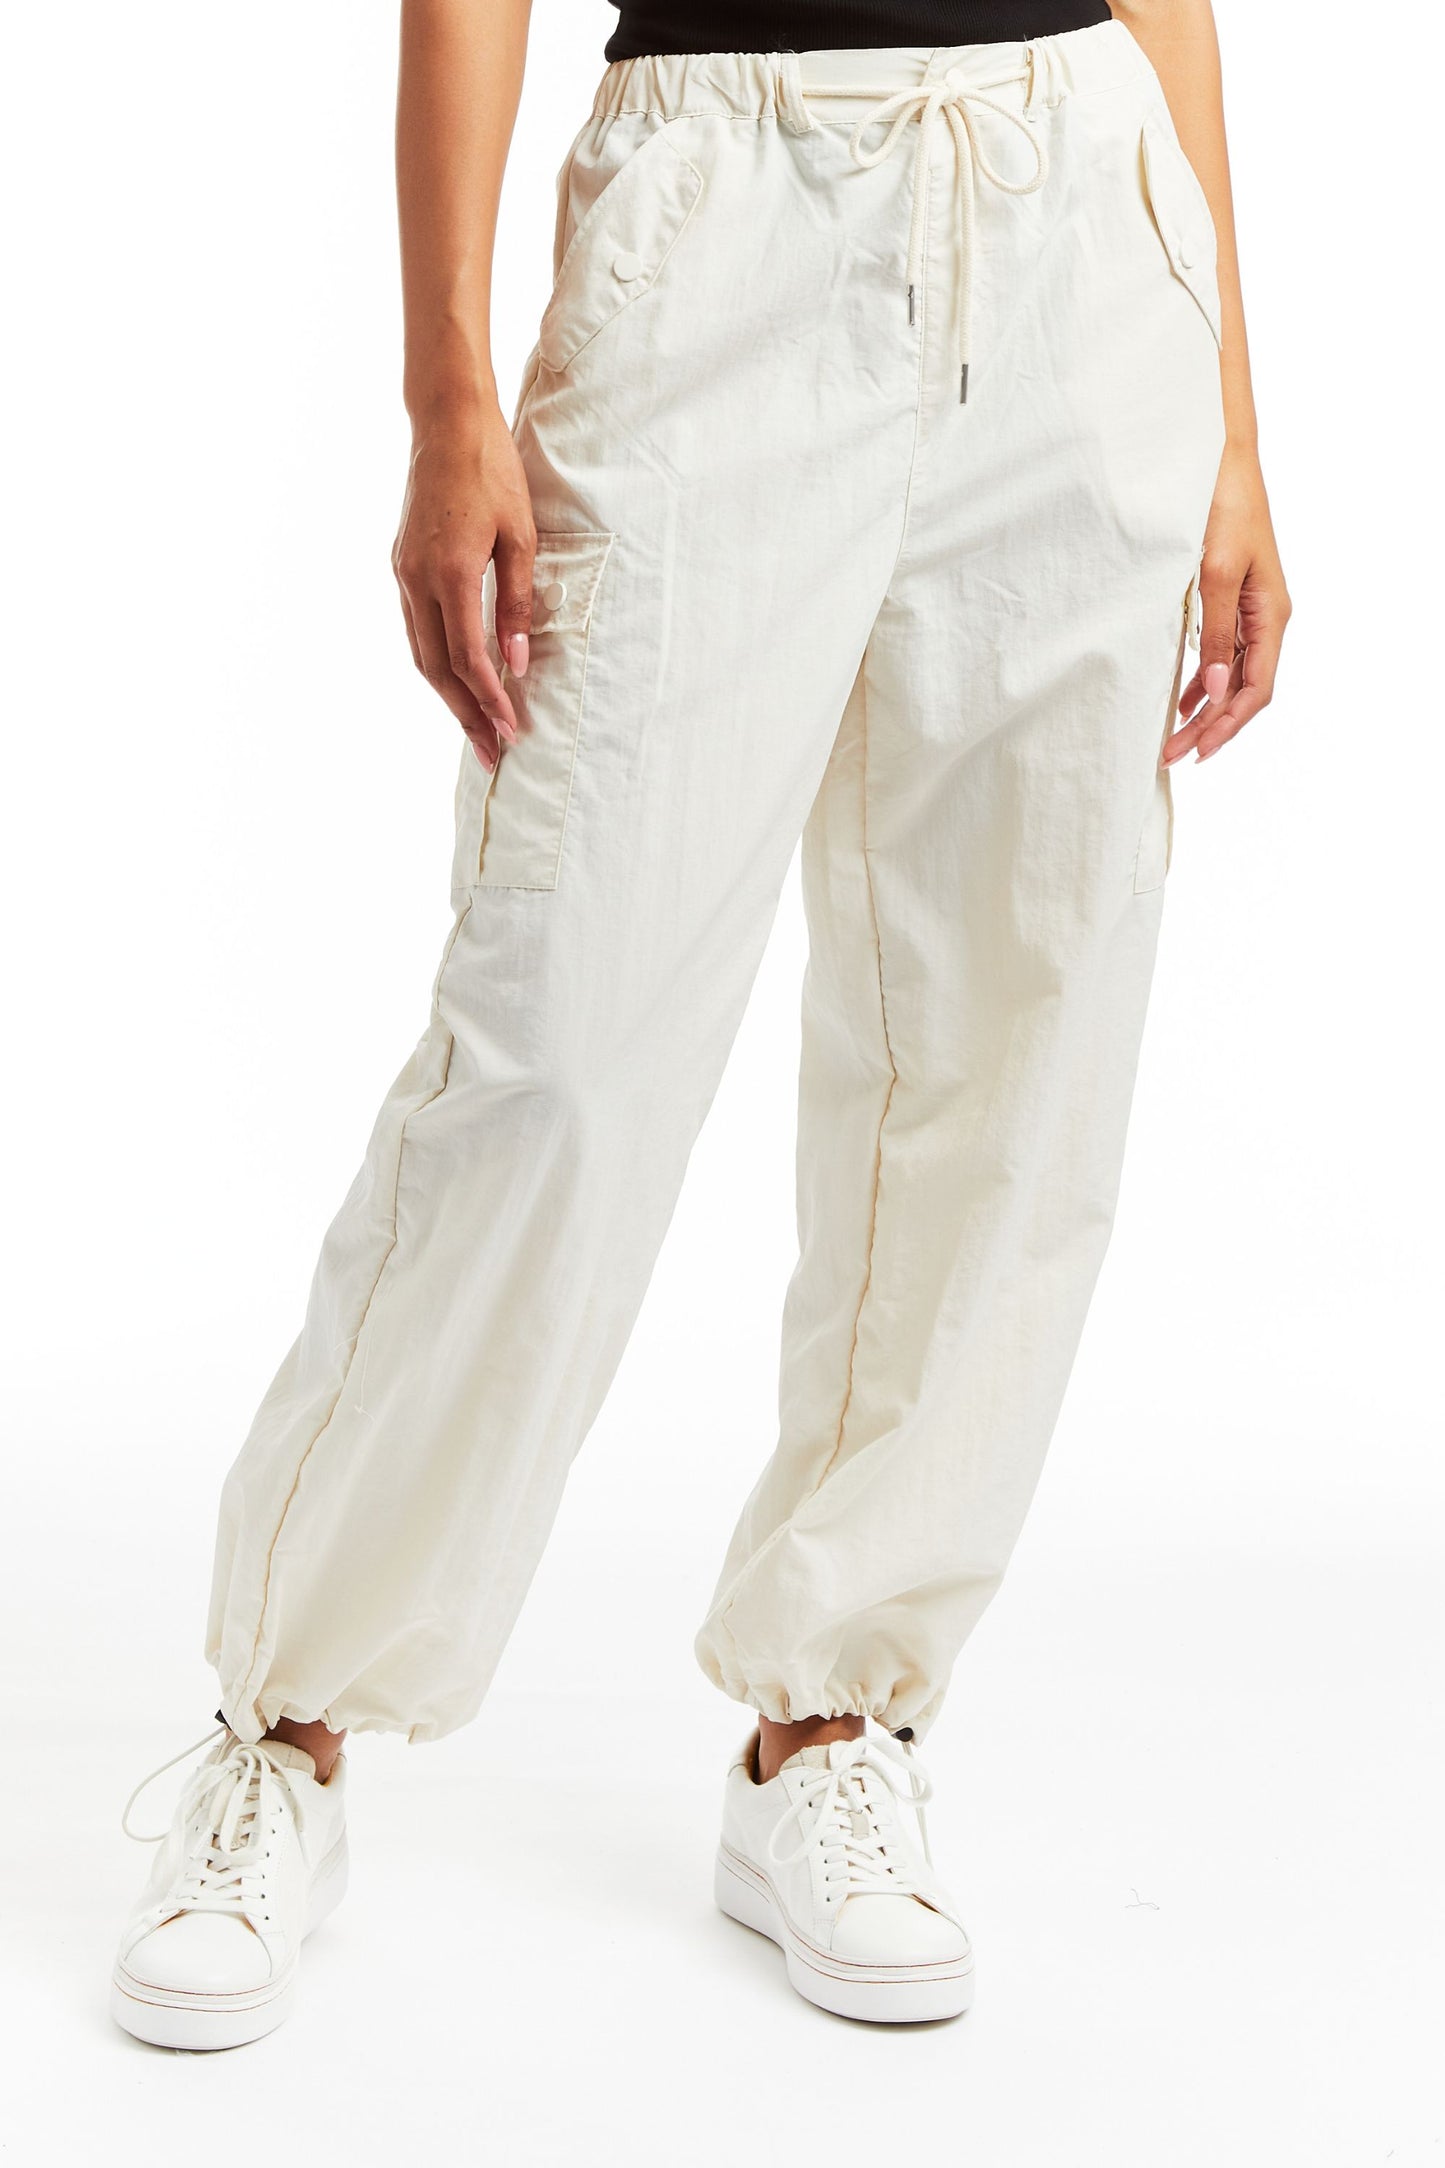 Parachute Cargo Pant With Adjustable Ankle Strap